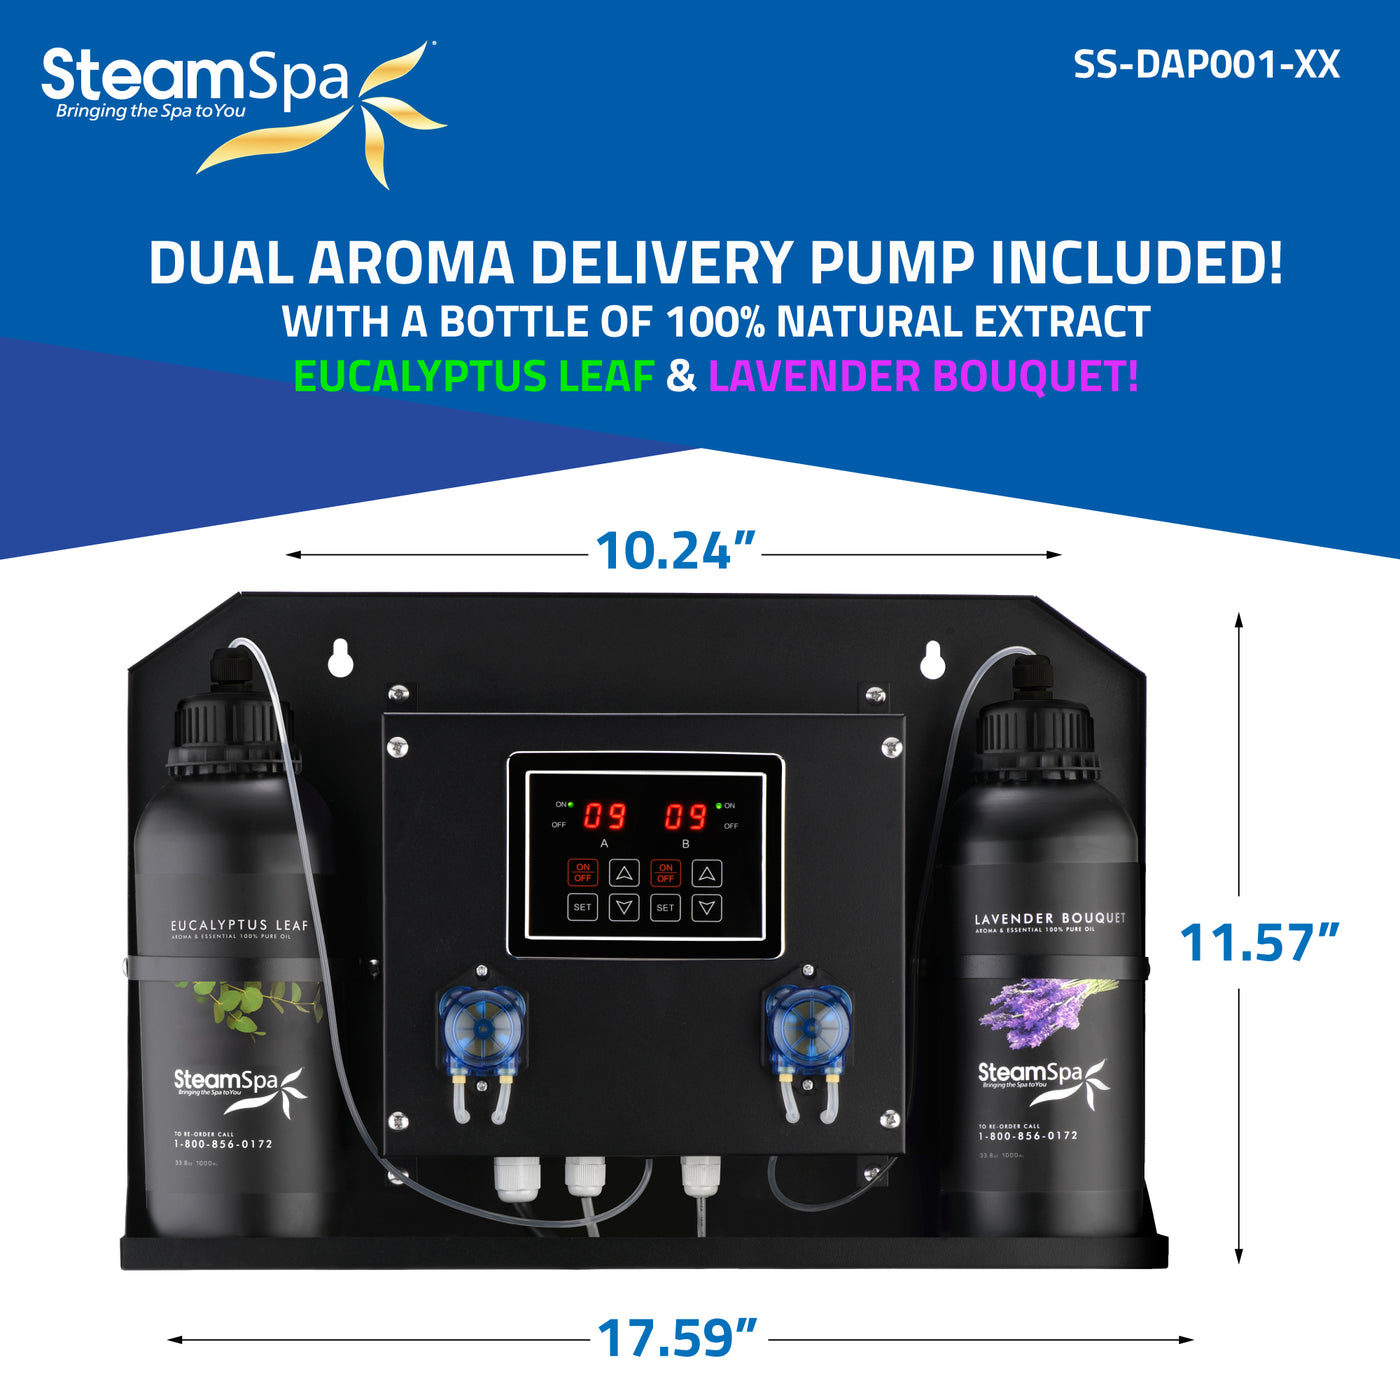 Black Series WiFi and Bluetooth 12kW QuickStart Steam Bath Generator Package with Dual Aroma Pump in Brushed Nickel BKT1200BN-ADP